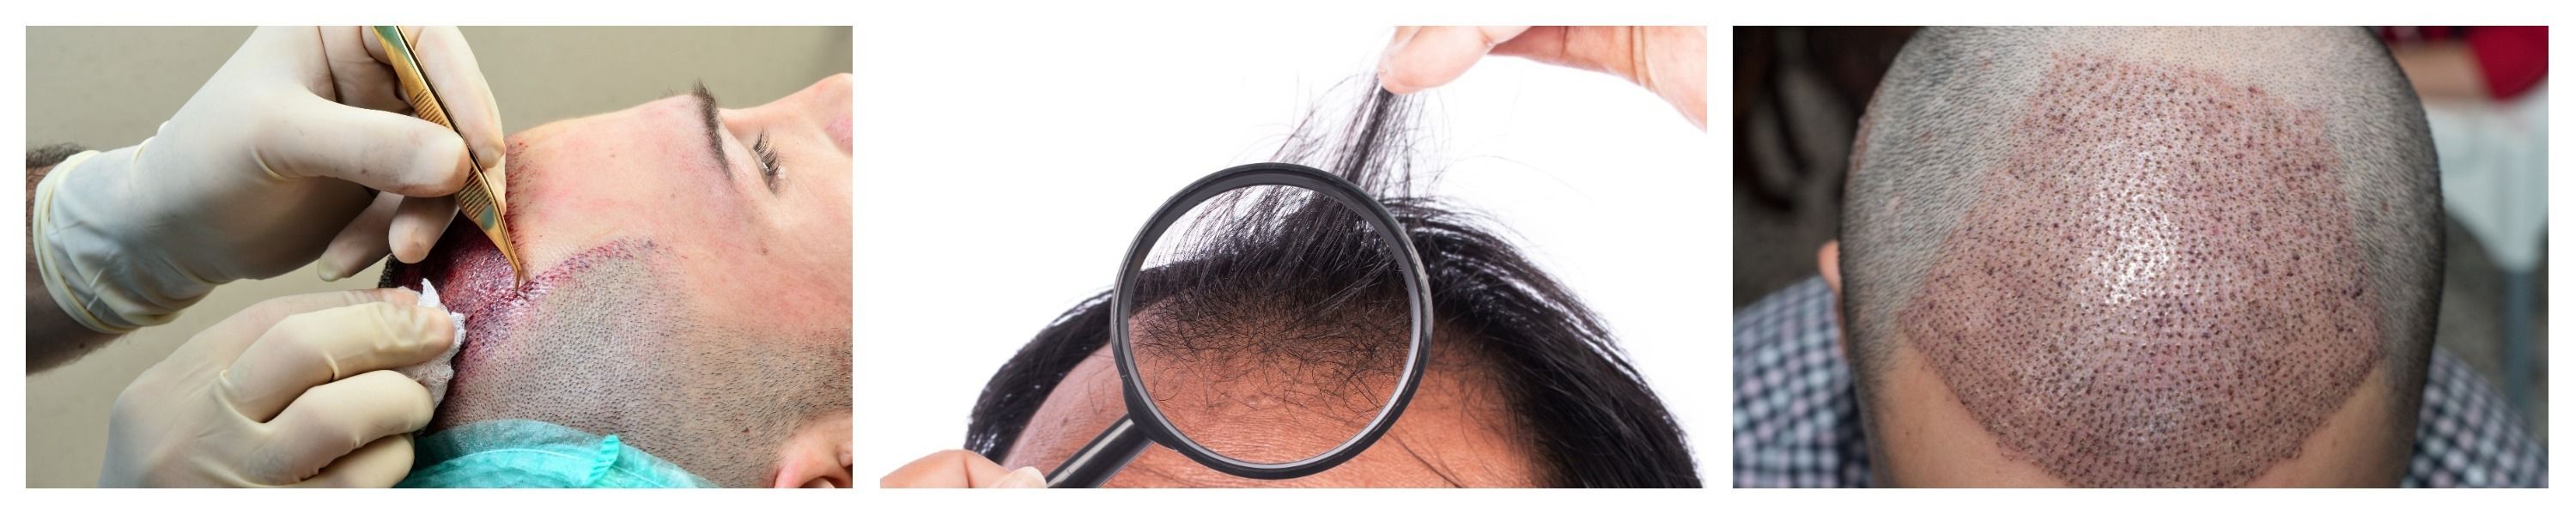 ISHRS Launches Awareness Campaign of Black Market Hair Restoration